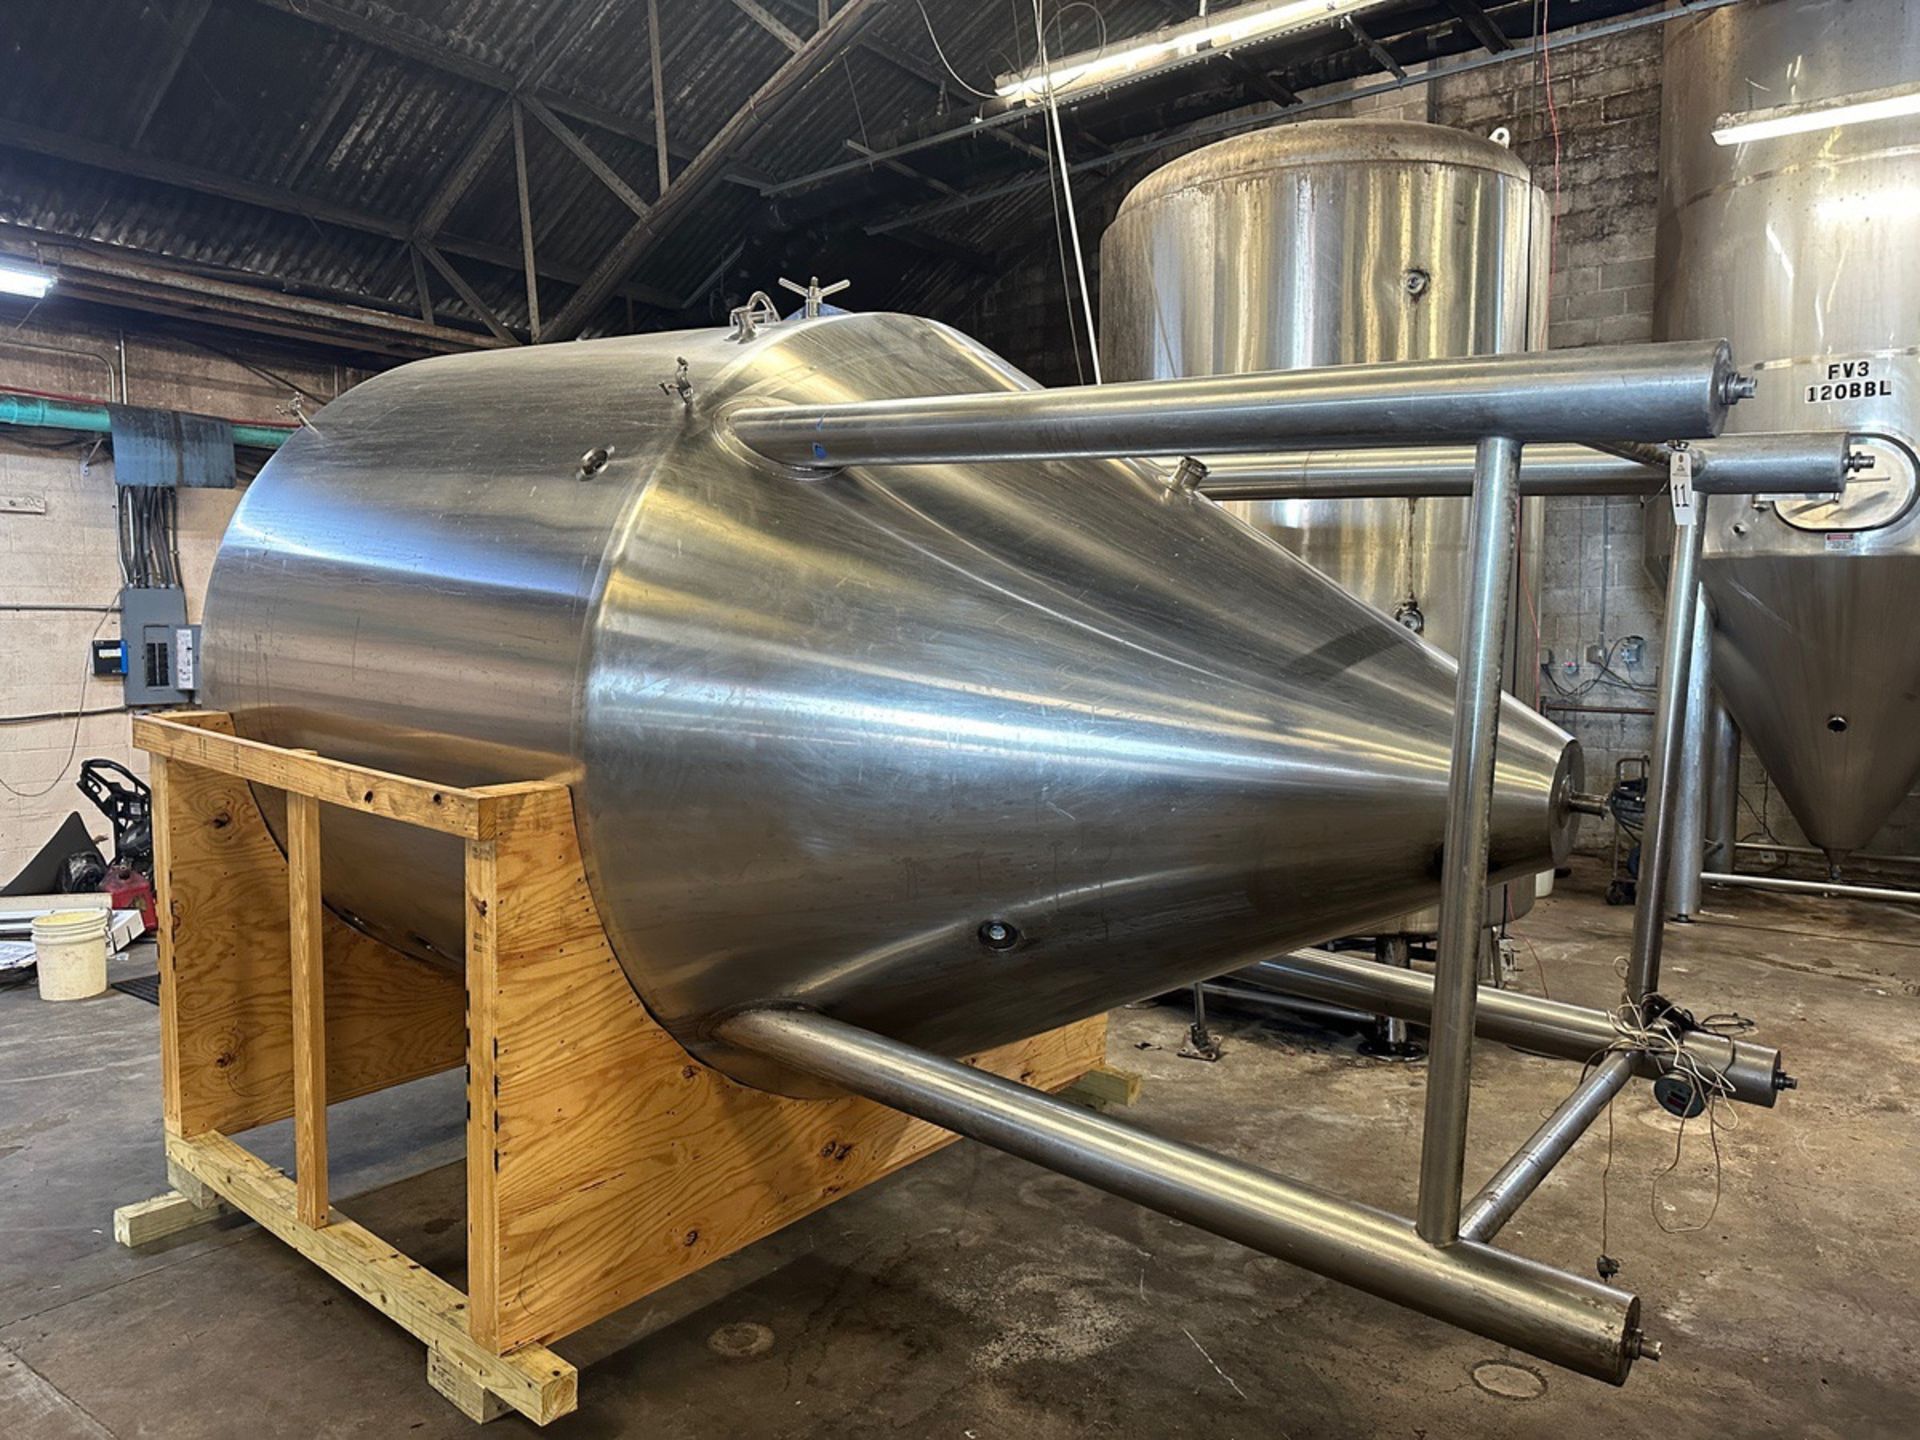 Premier Stainless 60 BBL Stainless Steel Fermentation Tank - Cone Bottom, Glycol Jac | Rig Fee $750 - Image 2 of 4